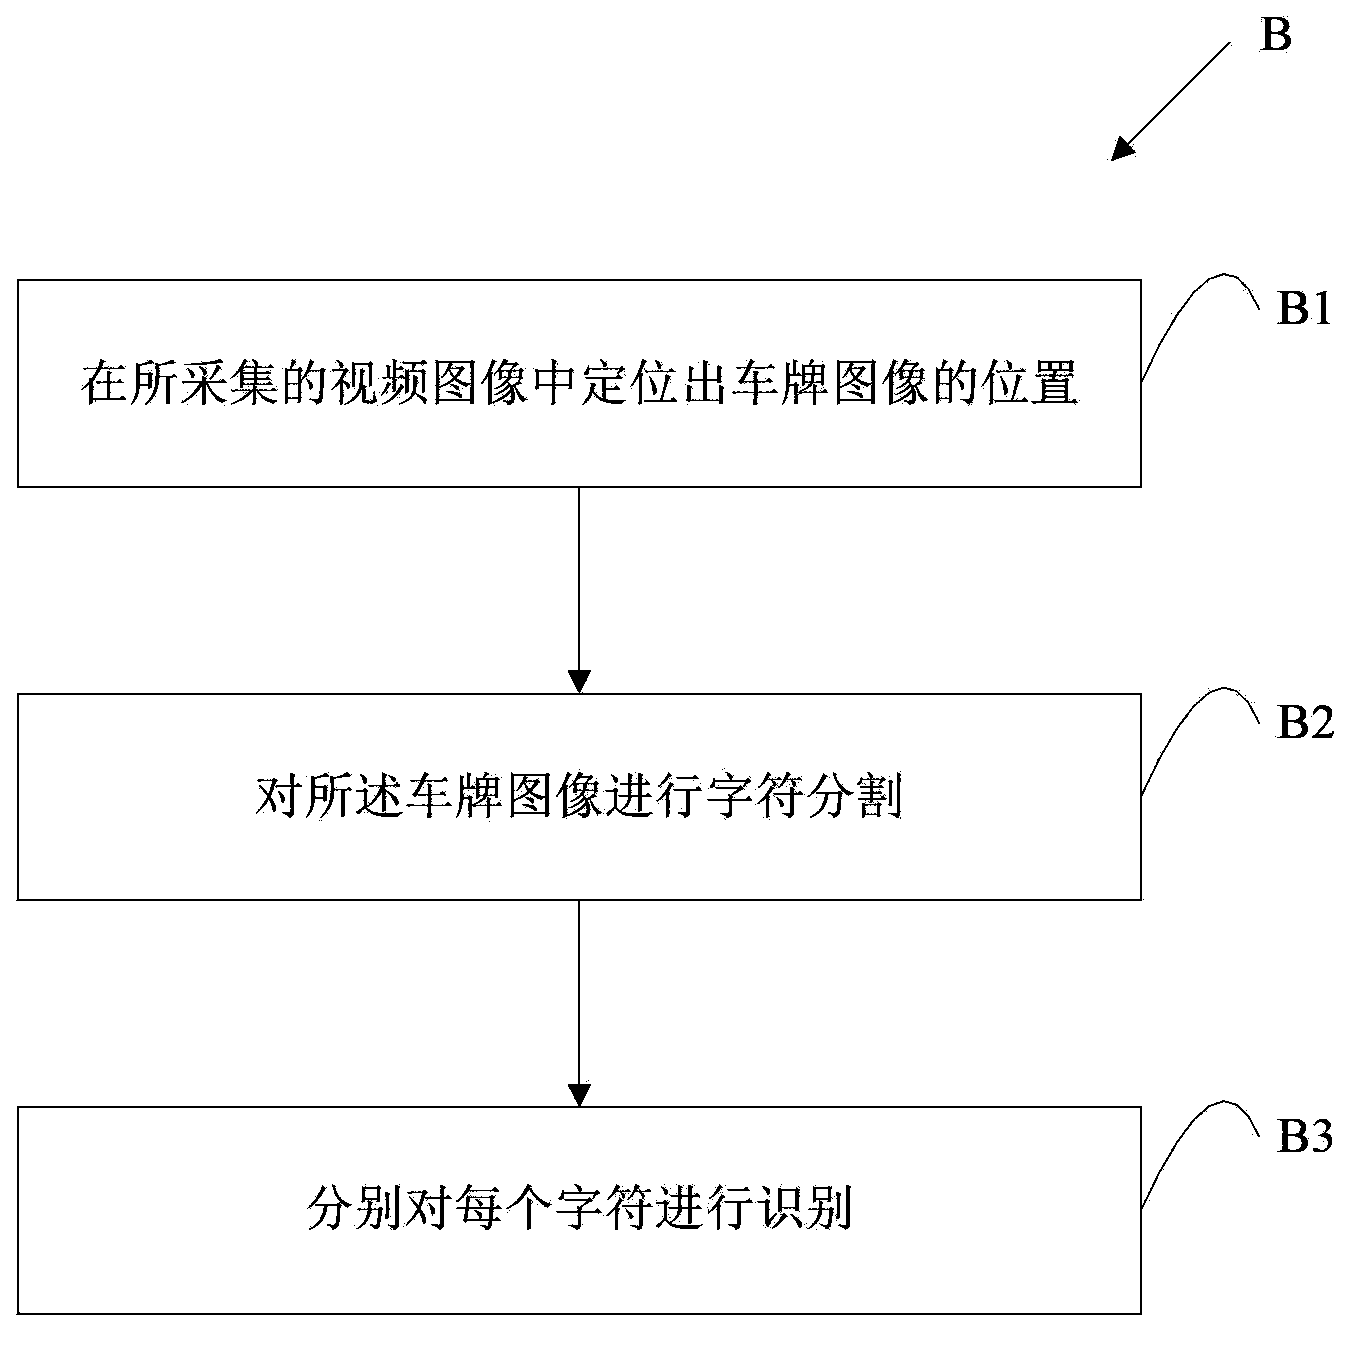 Vehicle license plate recognition method and system